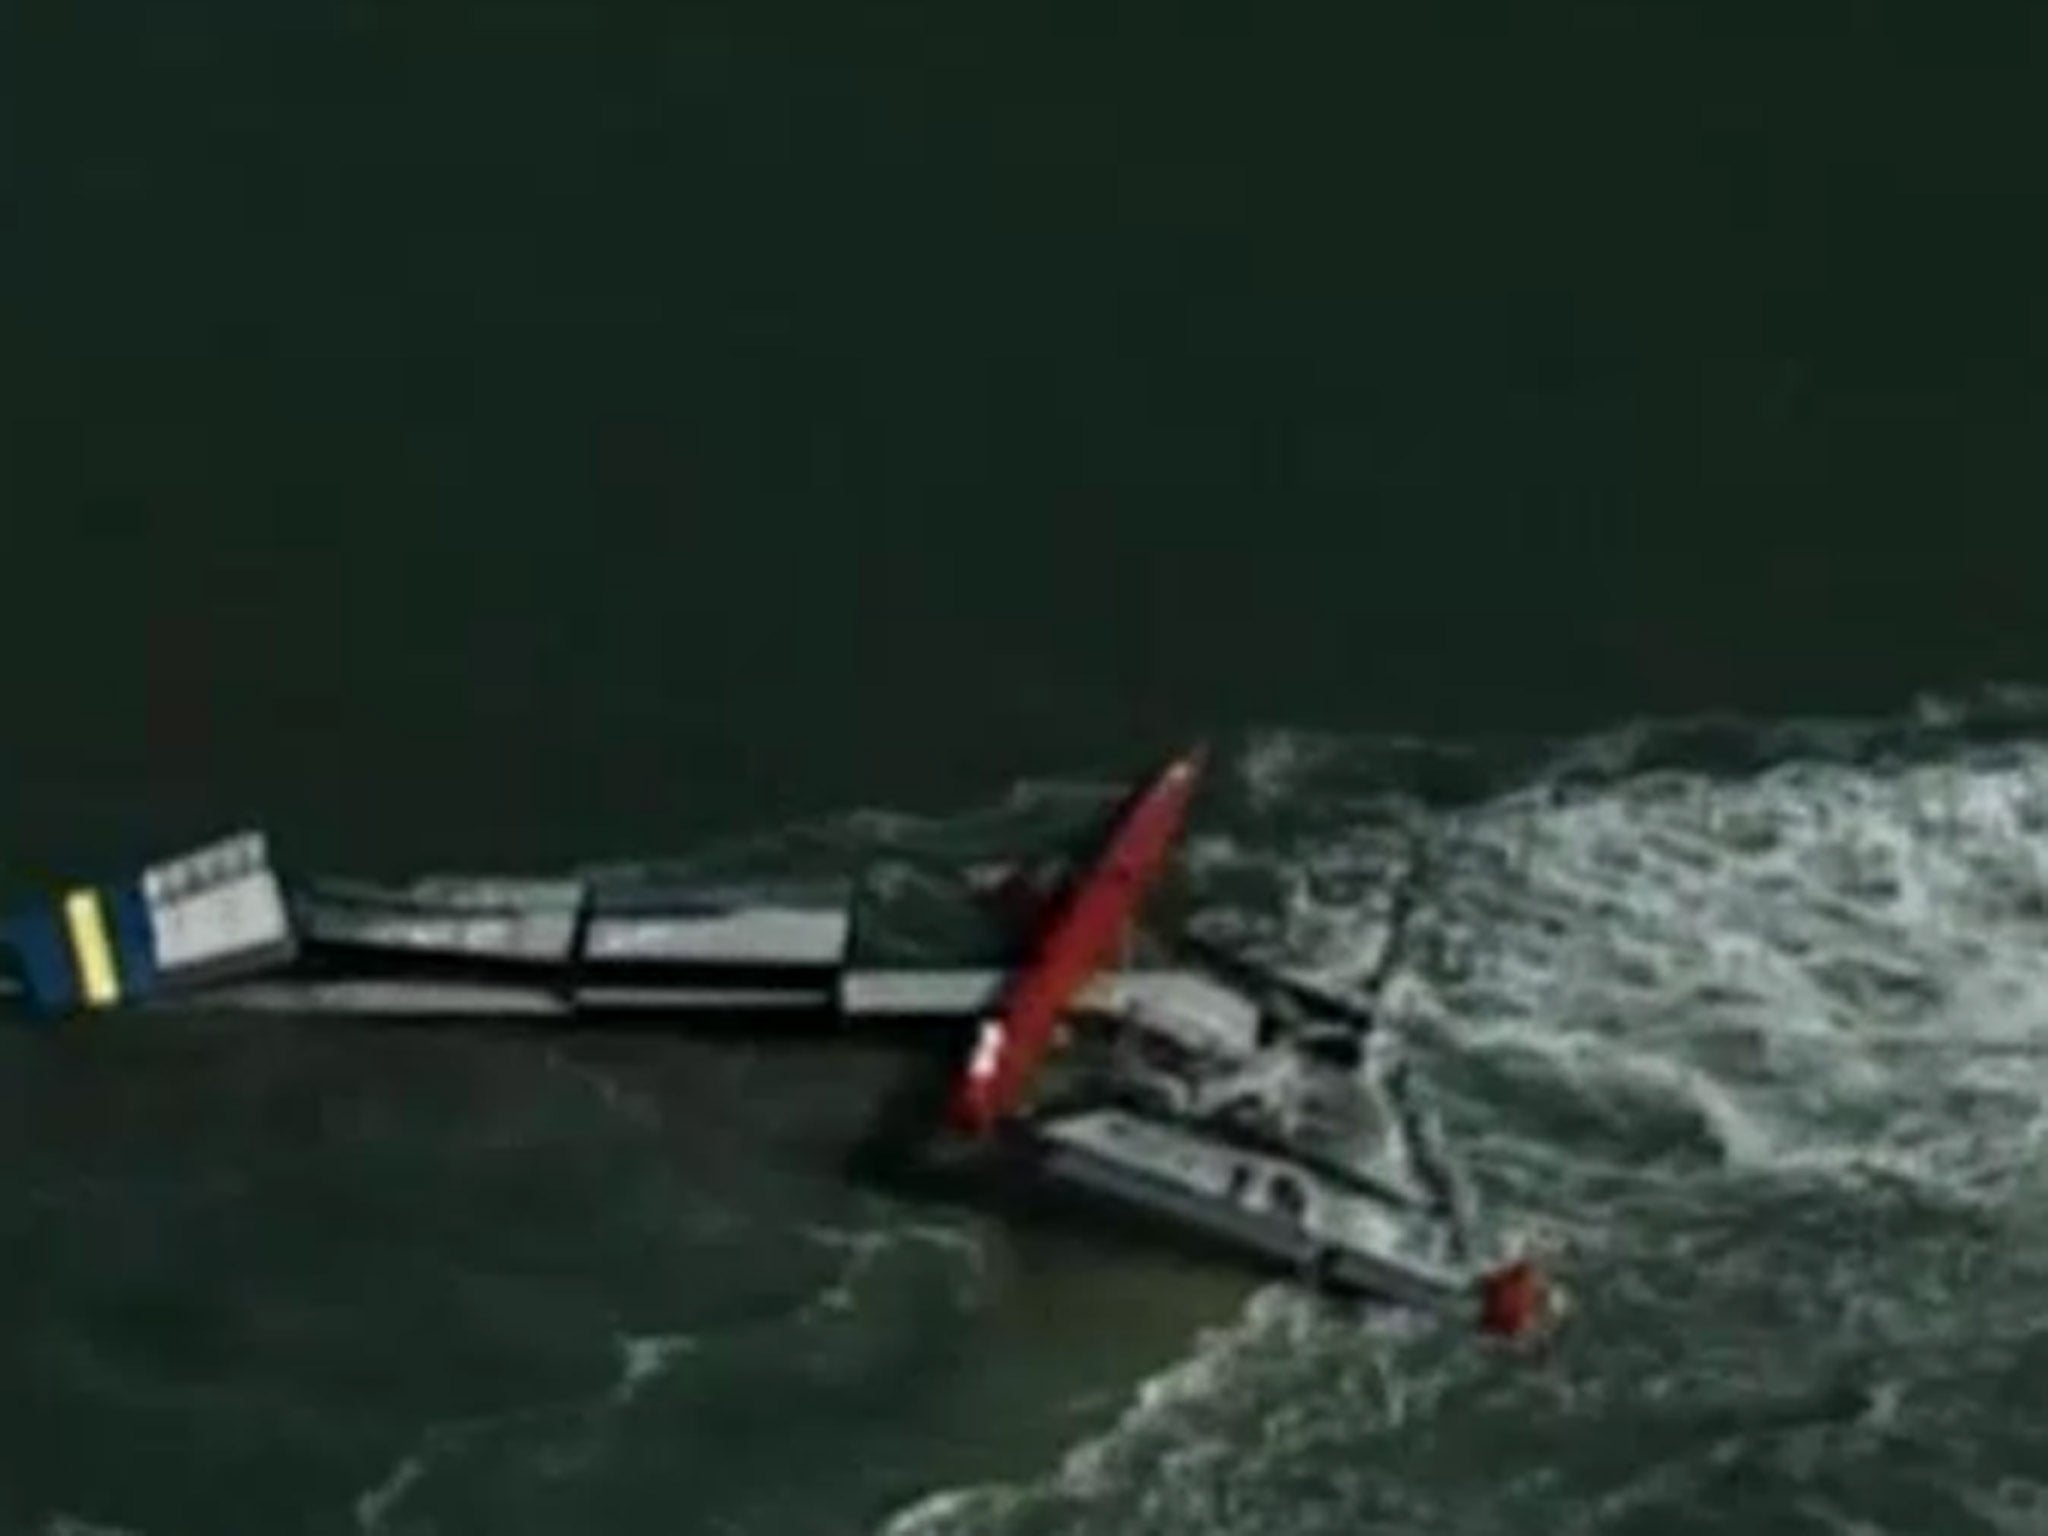 The capsized catamaran is towed back to shore